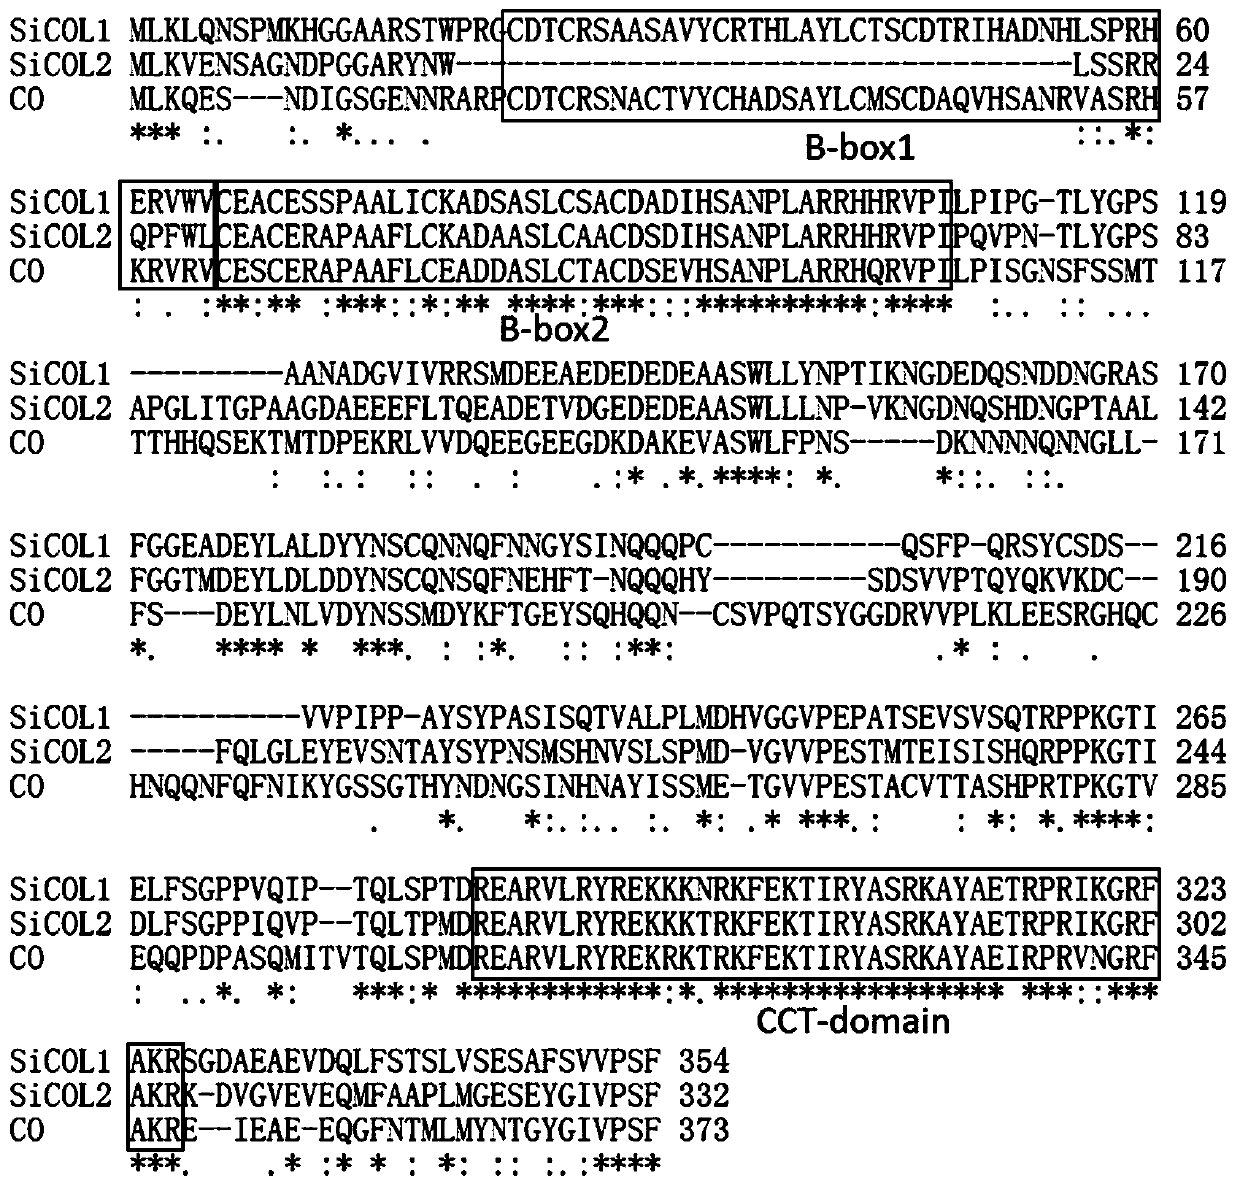 Sesame sicol1 and sicol2 genes and their application